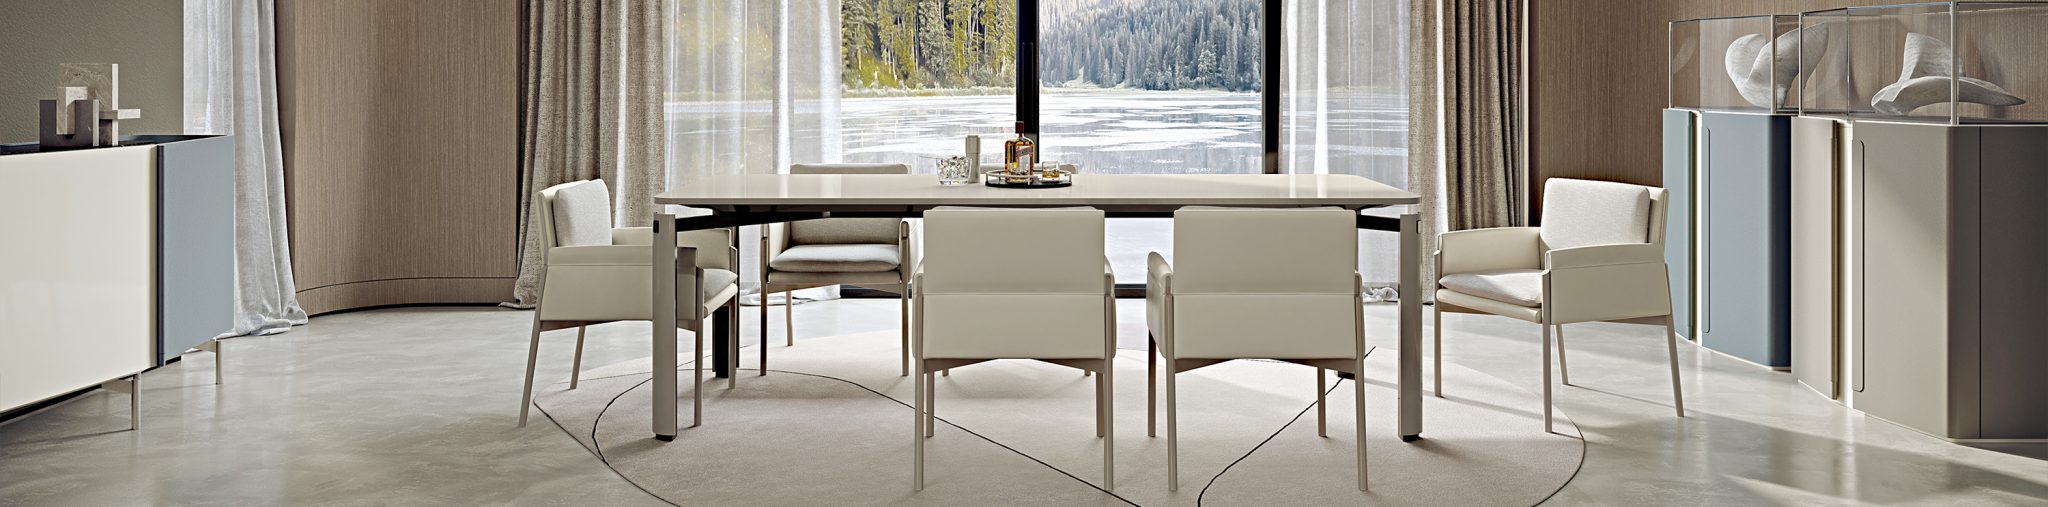 Zenit dining room table with chairs Turri